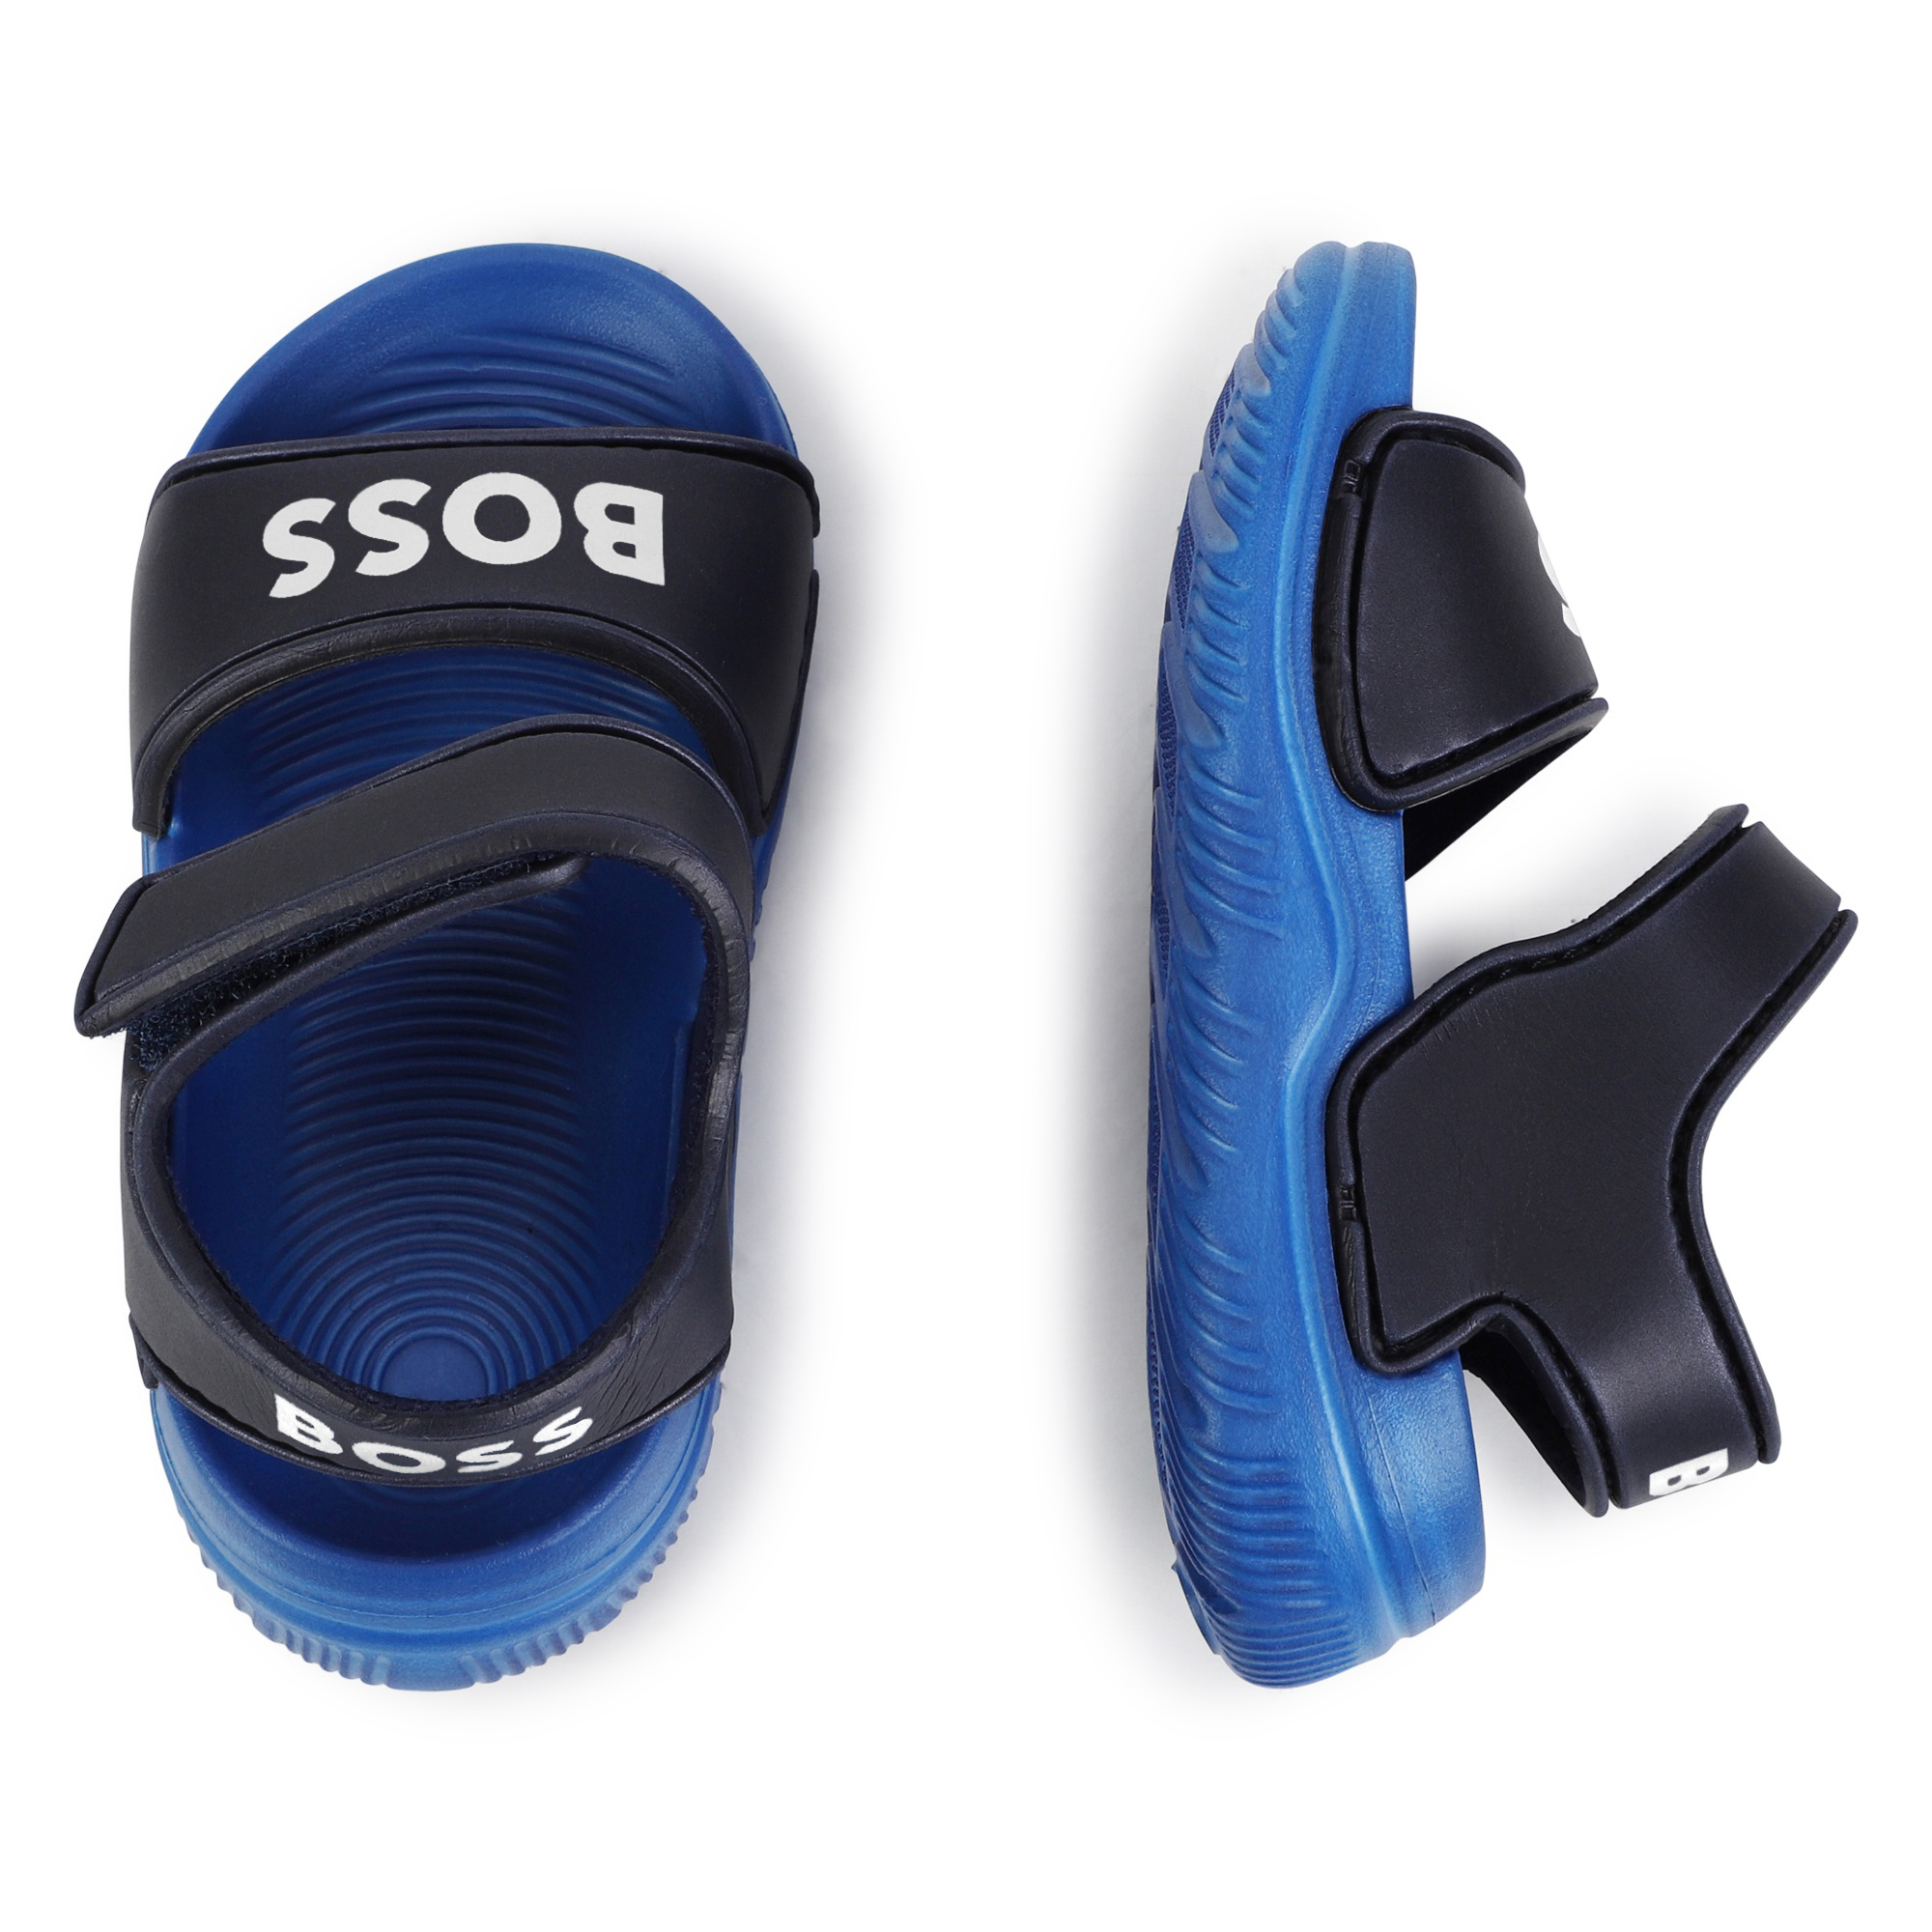 Two-tone hook-and-loop sandals BOSS for BOY